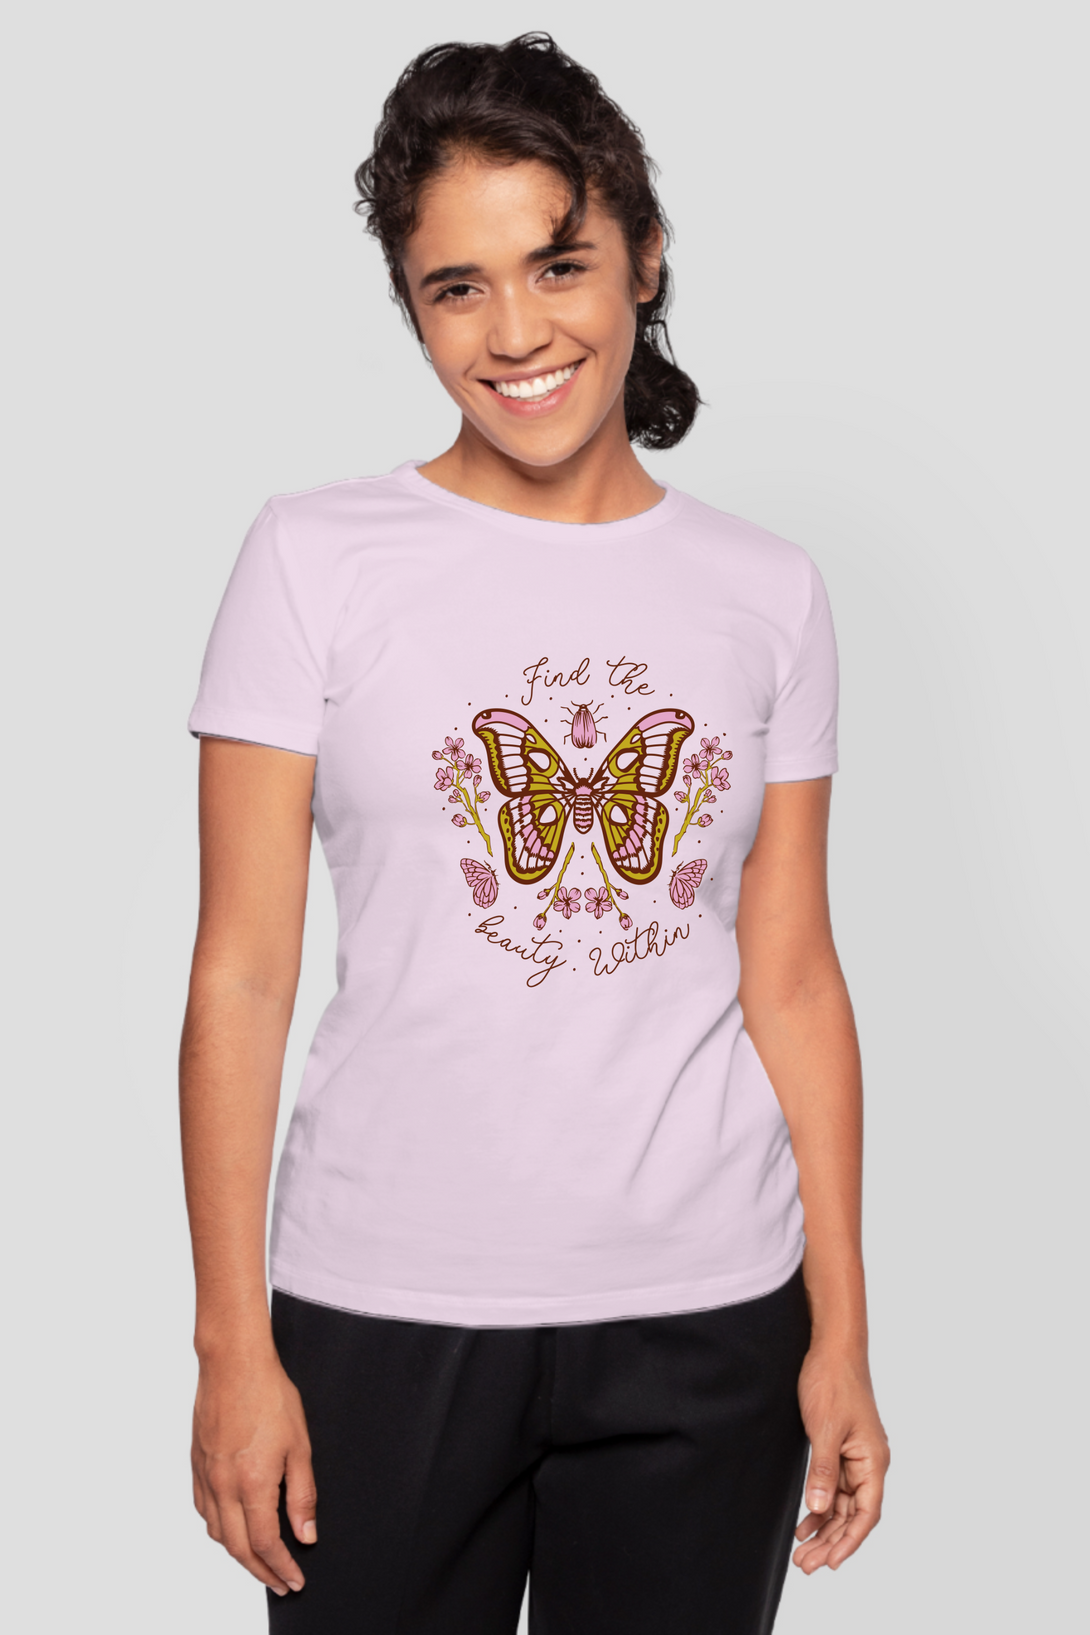 Find The Beauty Within Printed T-Shirt For Women - WowWaves - 10